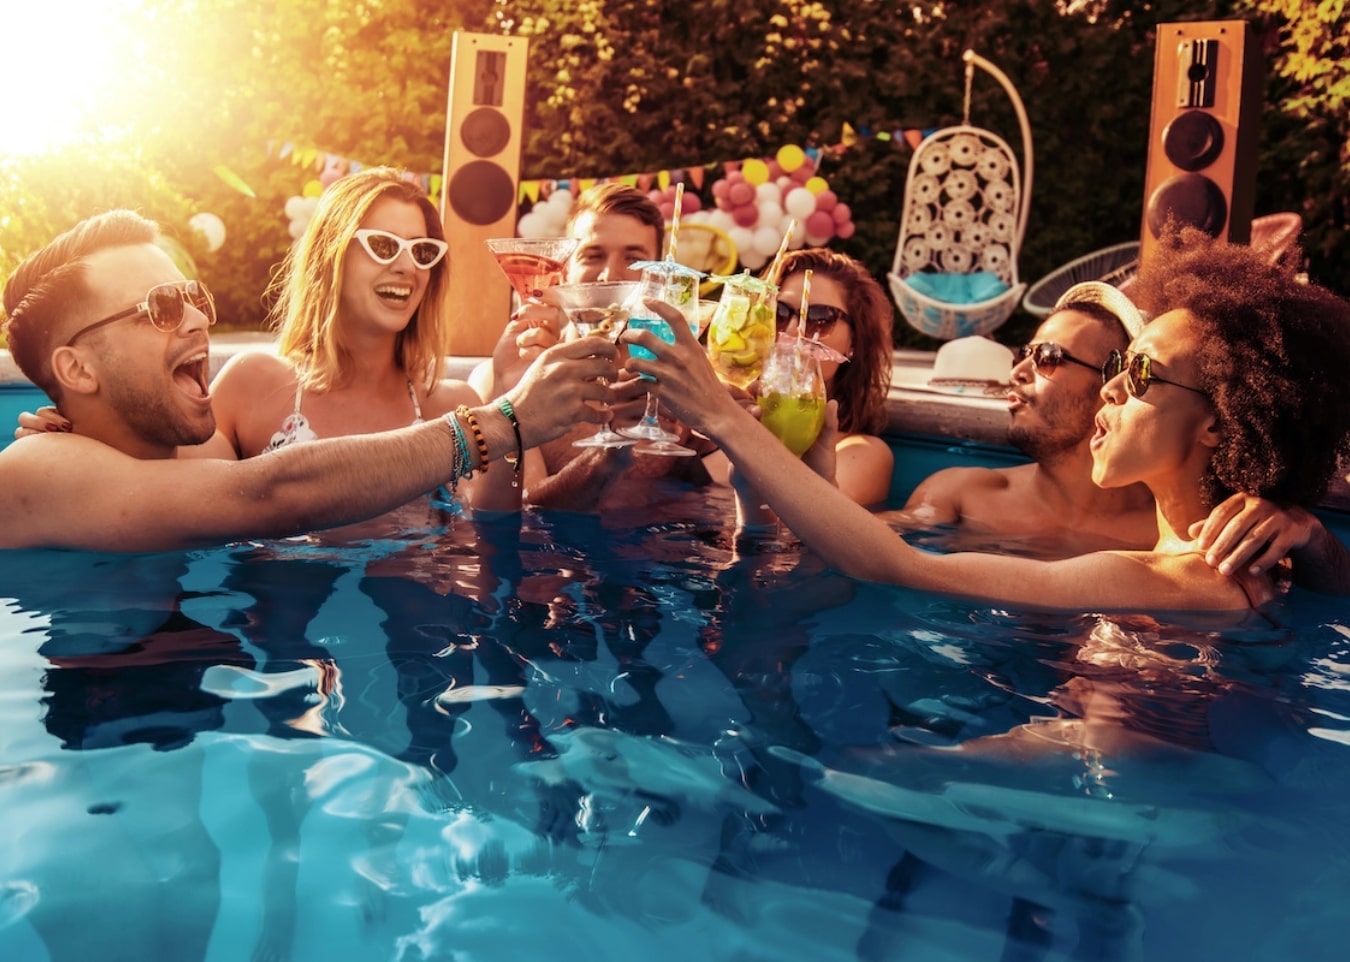 Young people toasting their drinks in a pool at a party